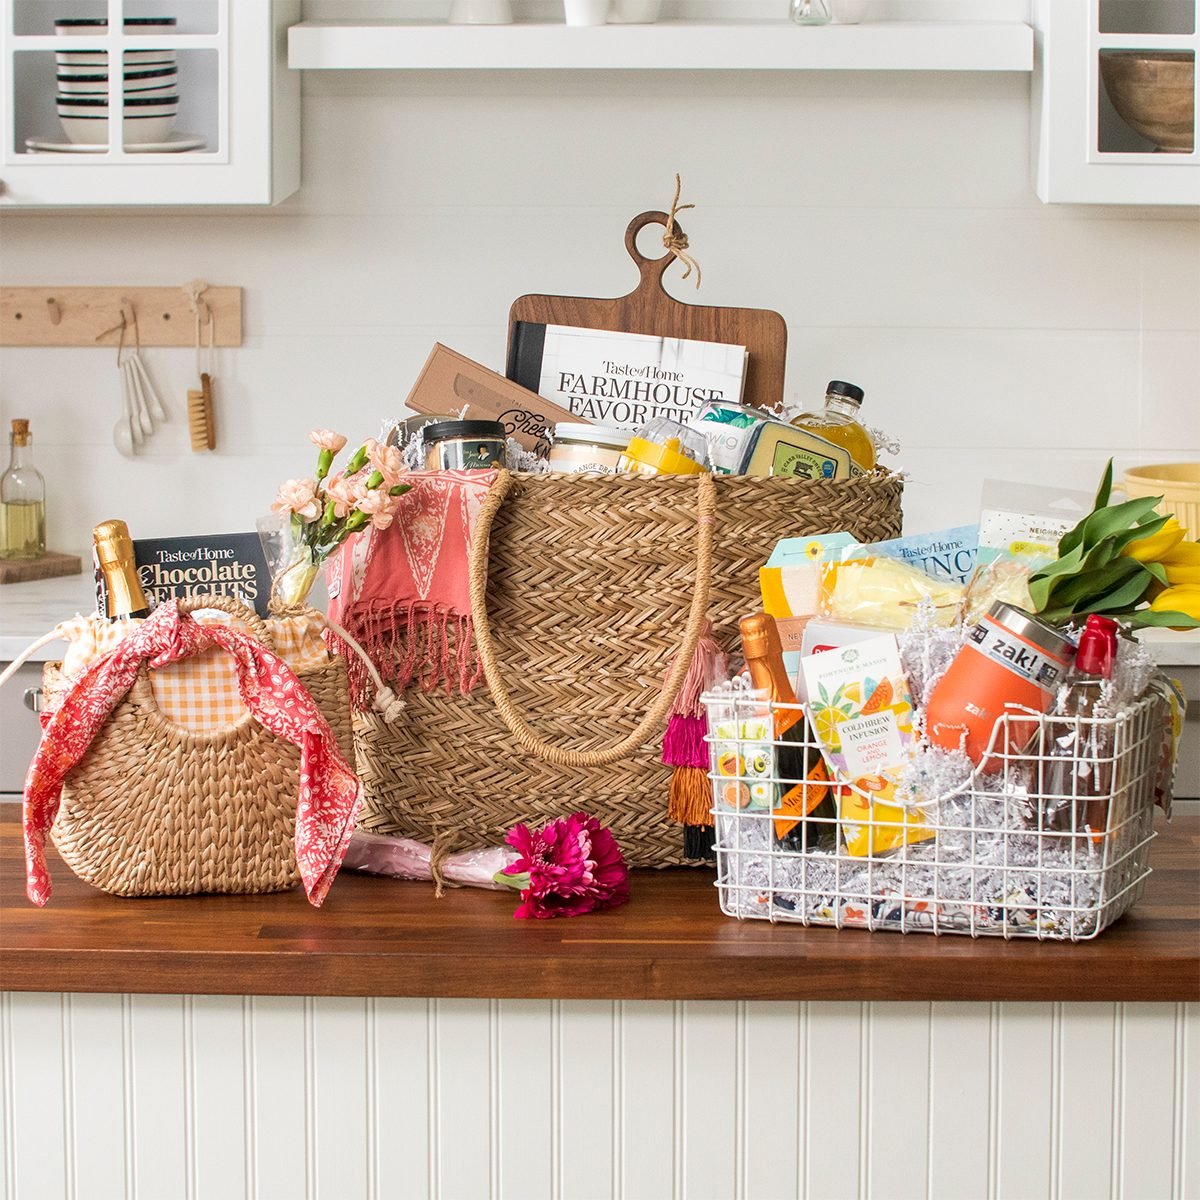 Housewarming Gift Ideas for Couple: New Home Gift Basket - Sunday Mimosas